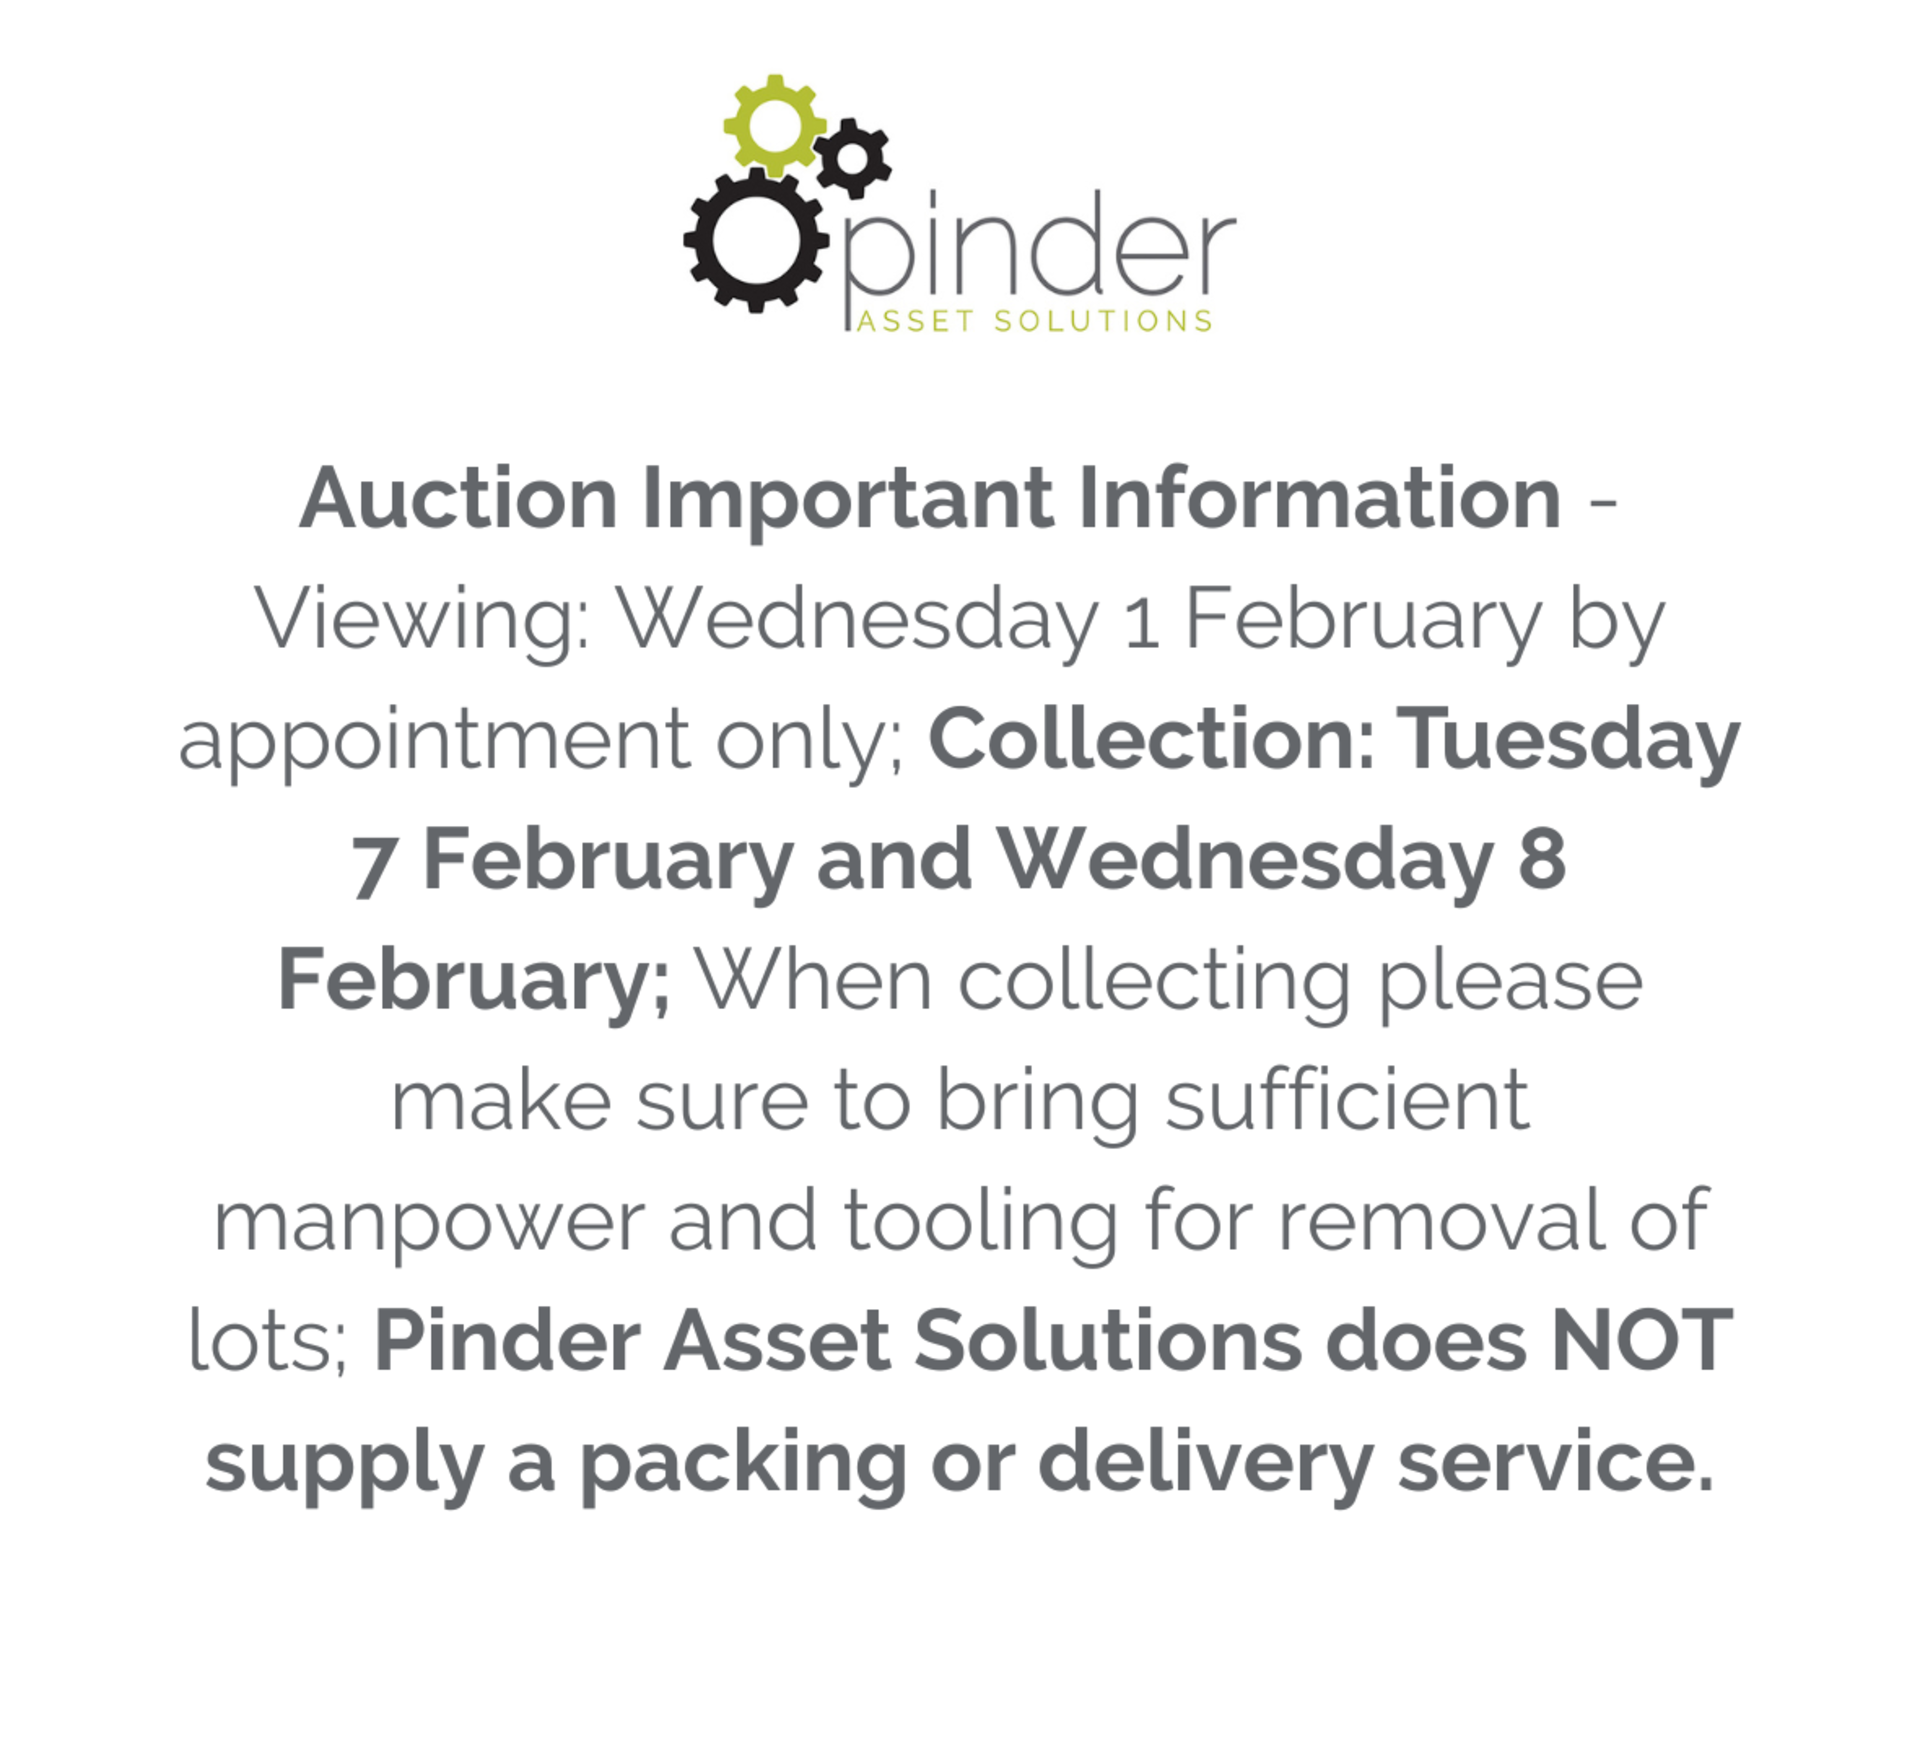 Auction Important Information - Viewing: Wednesday 1 February 2023 by appointment only;